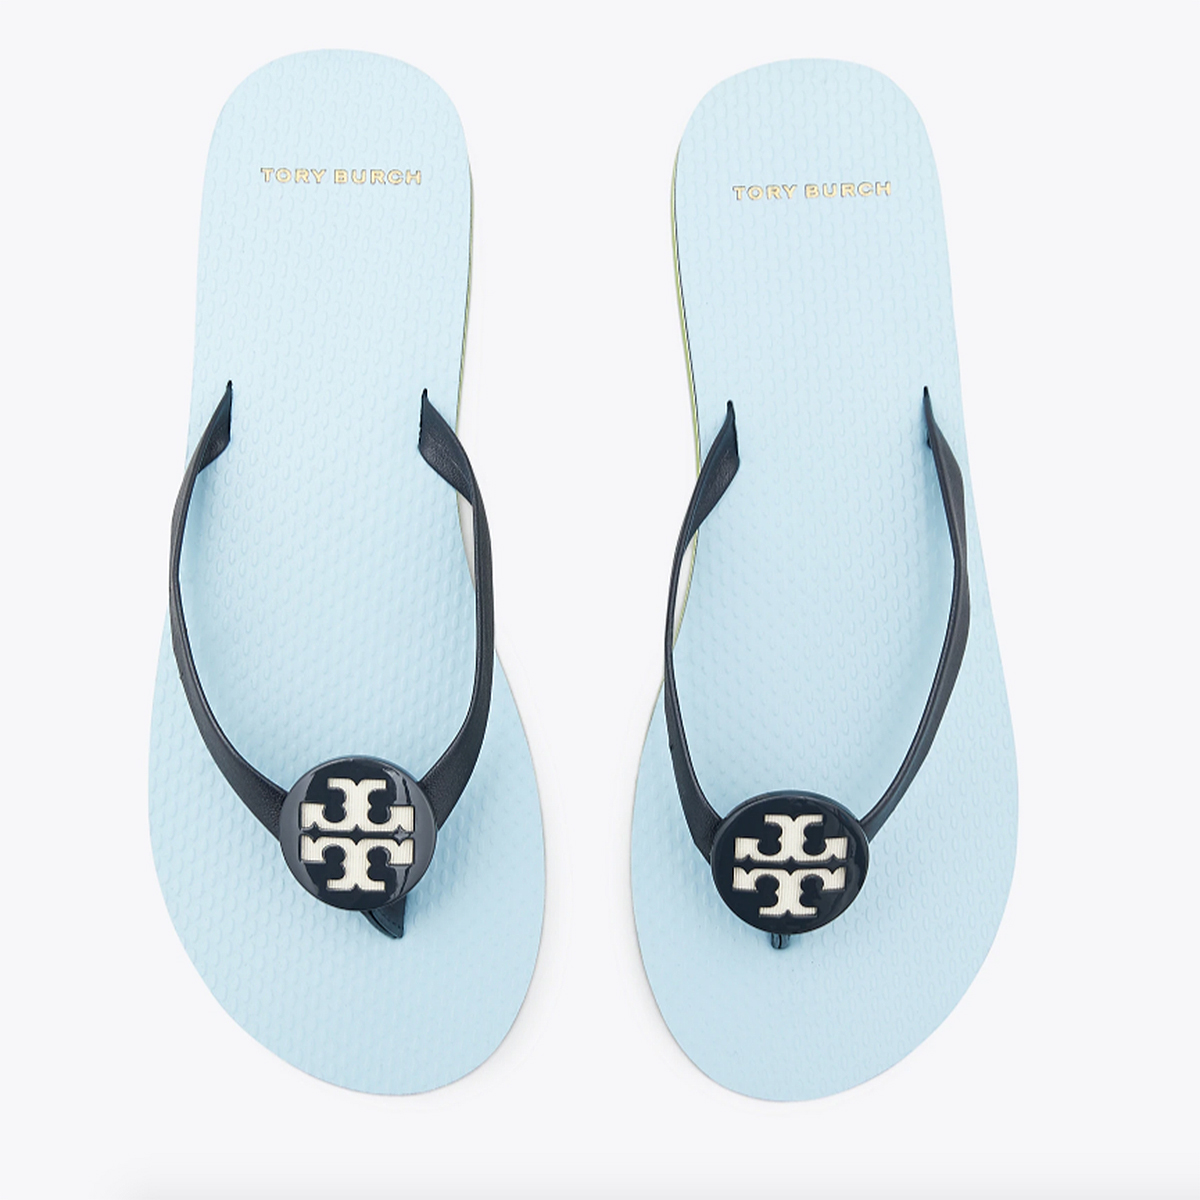 Tory Burch Flip Flops Are 50% Off Just in Time for Sandal Season